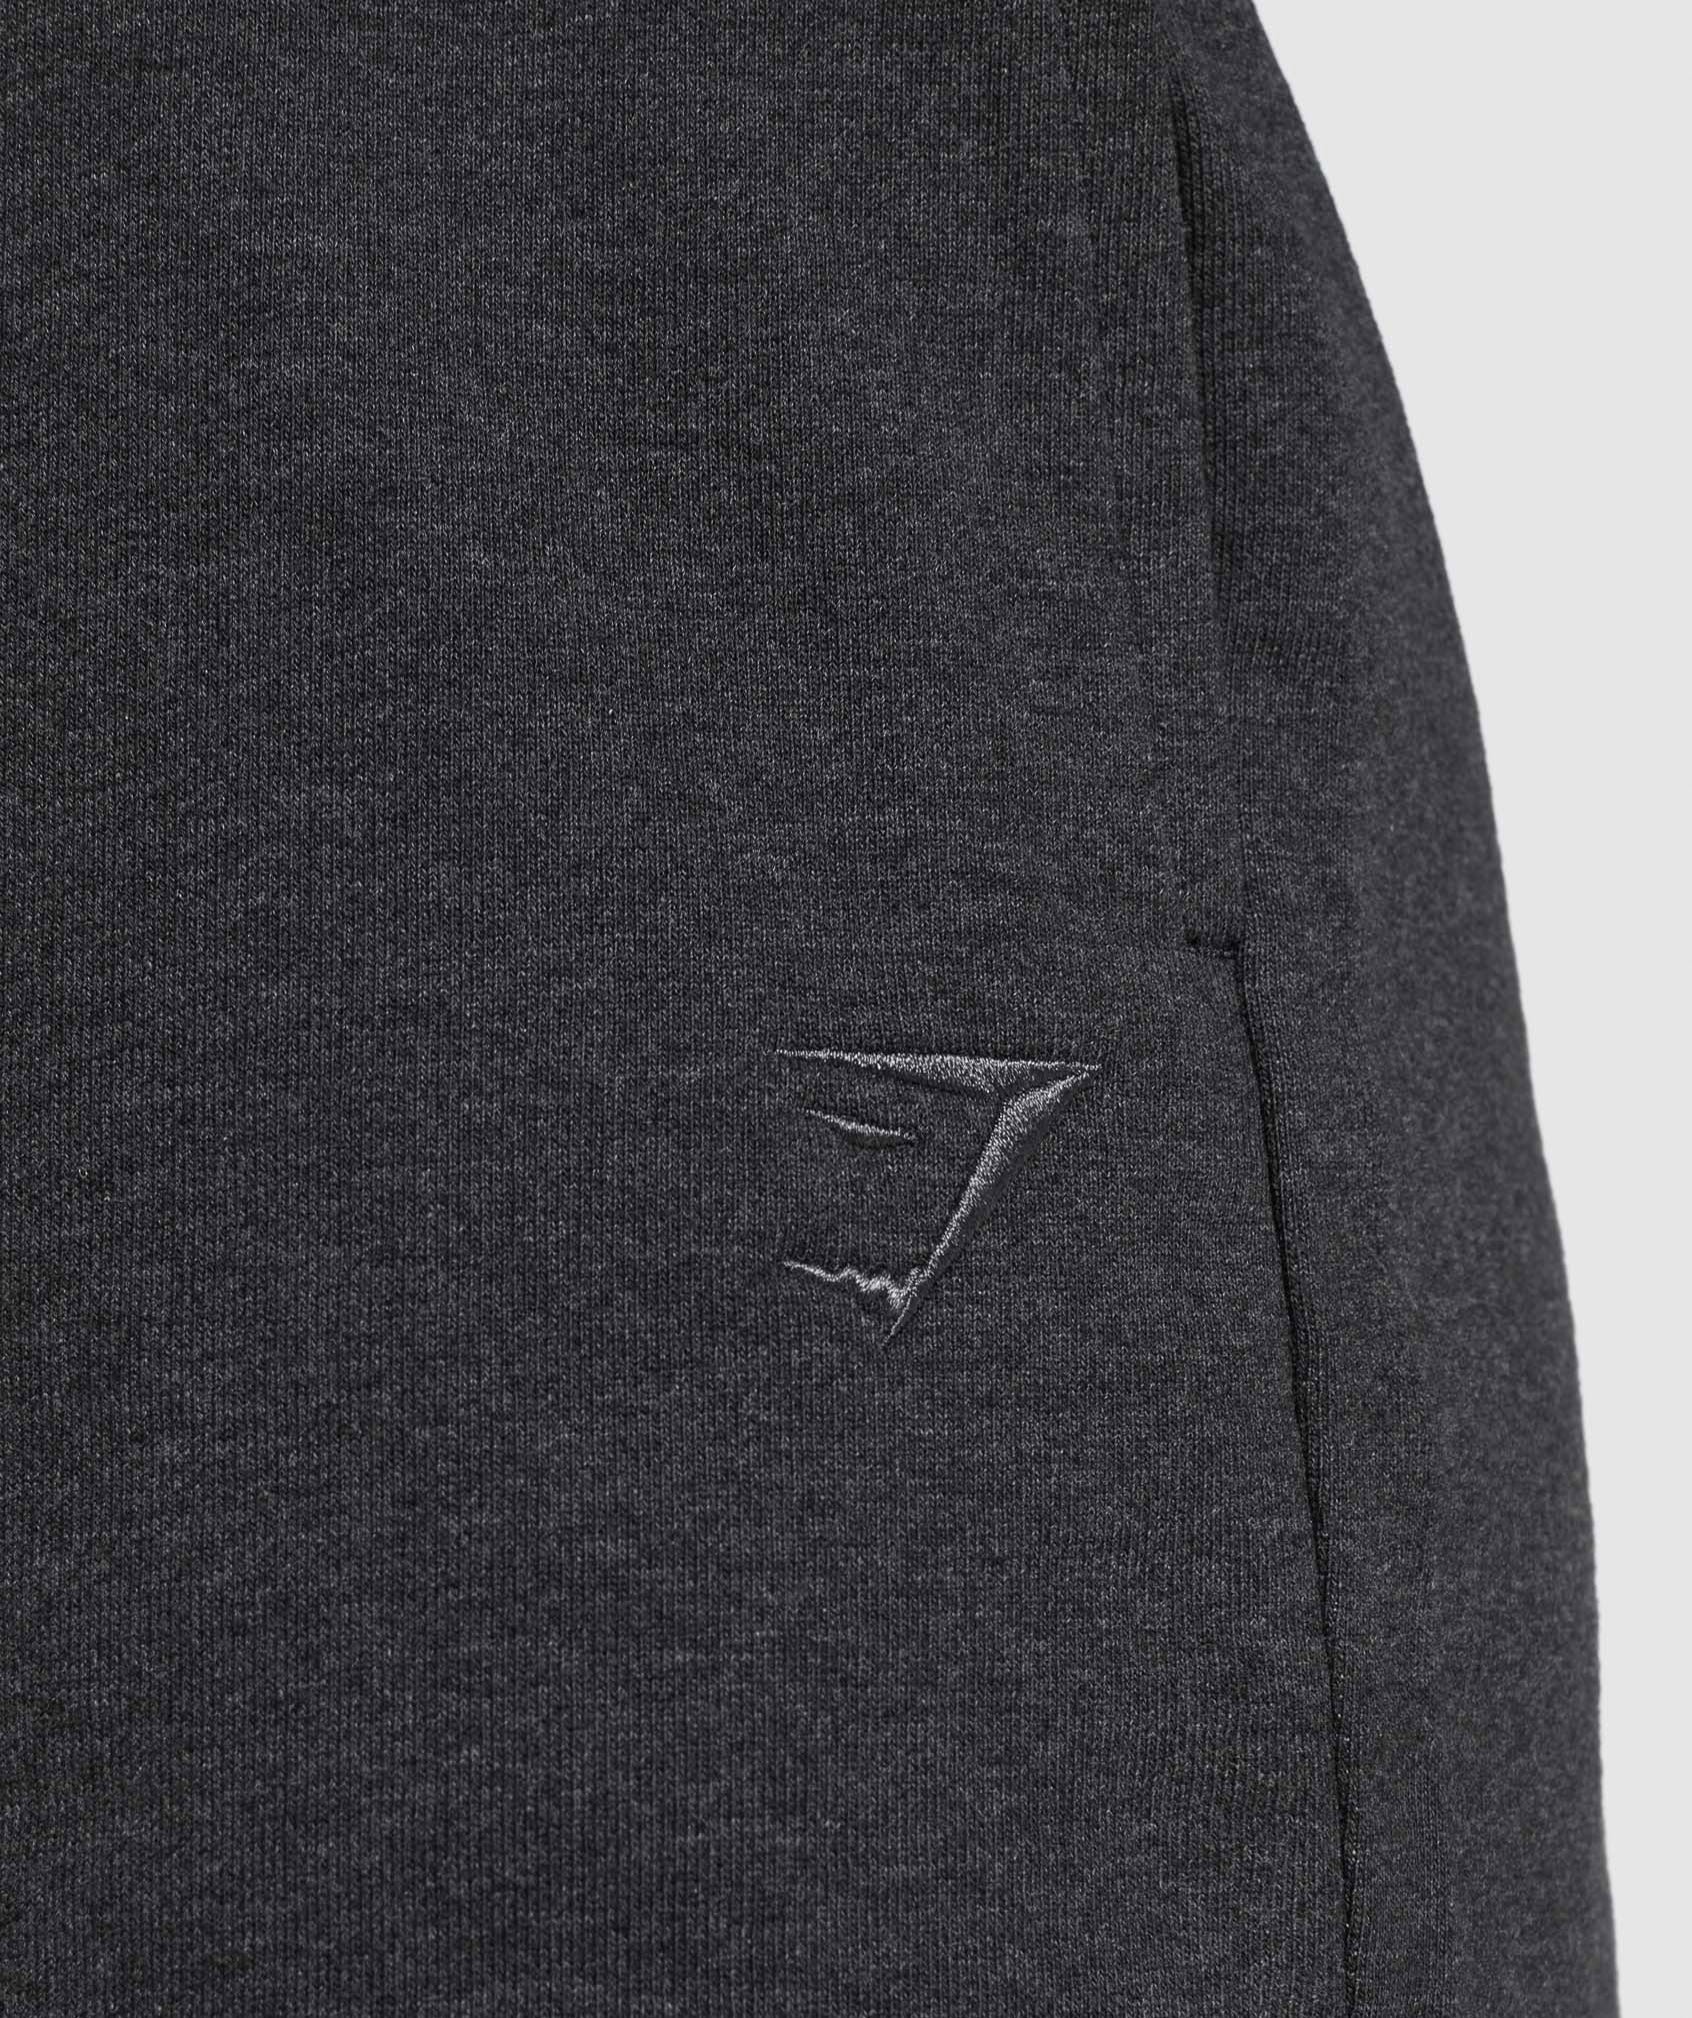 Rest Day Sweats Shorts in Black Core Marl - view 6